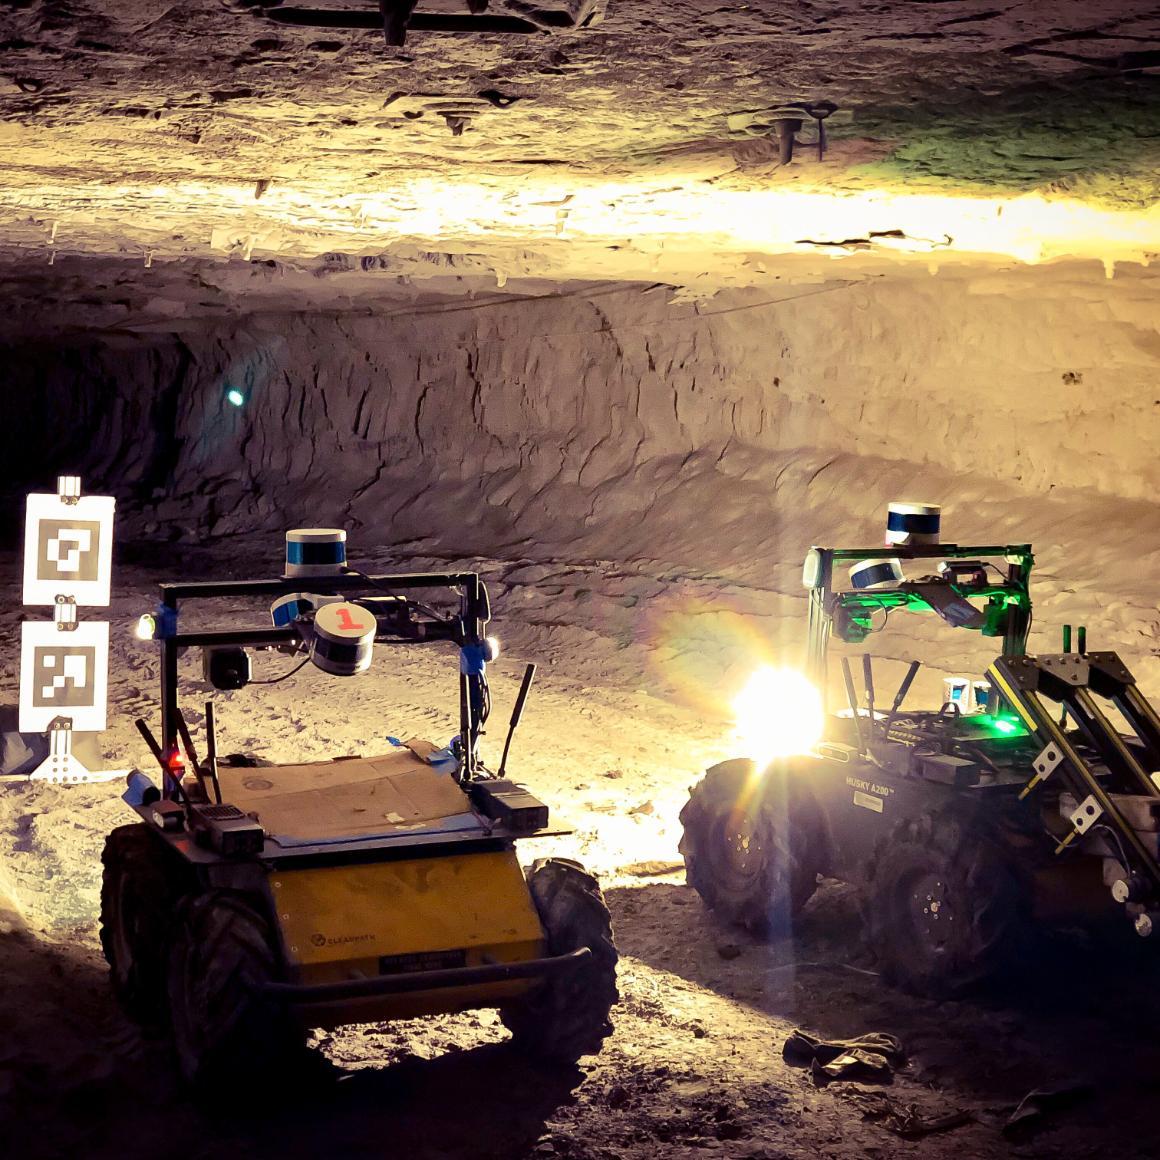 Two autonomous robots locate a target in a tunnel image link to story